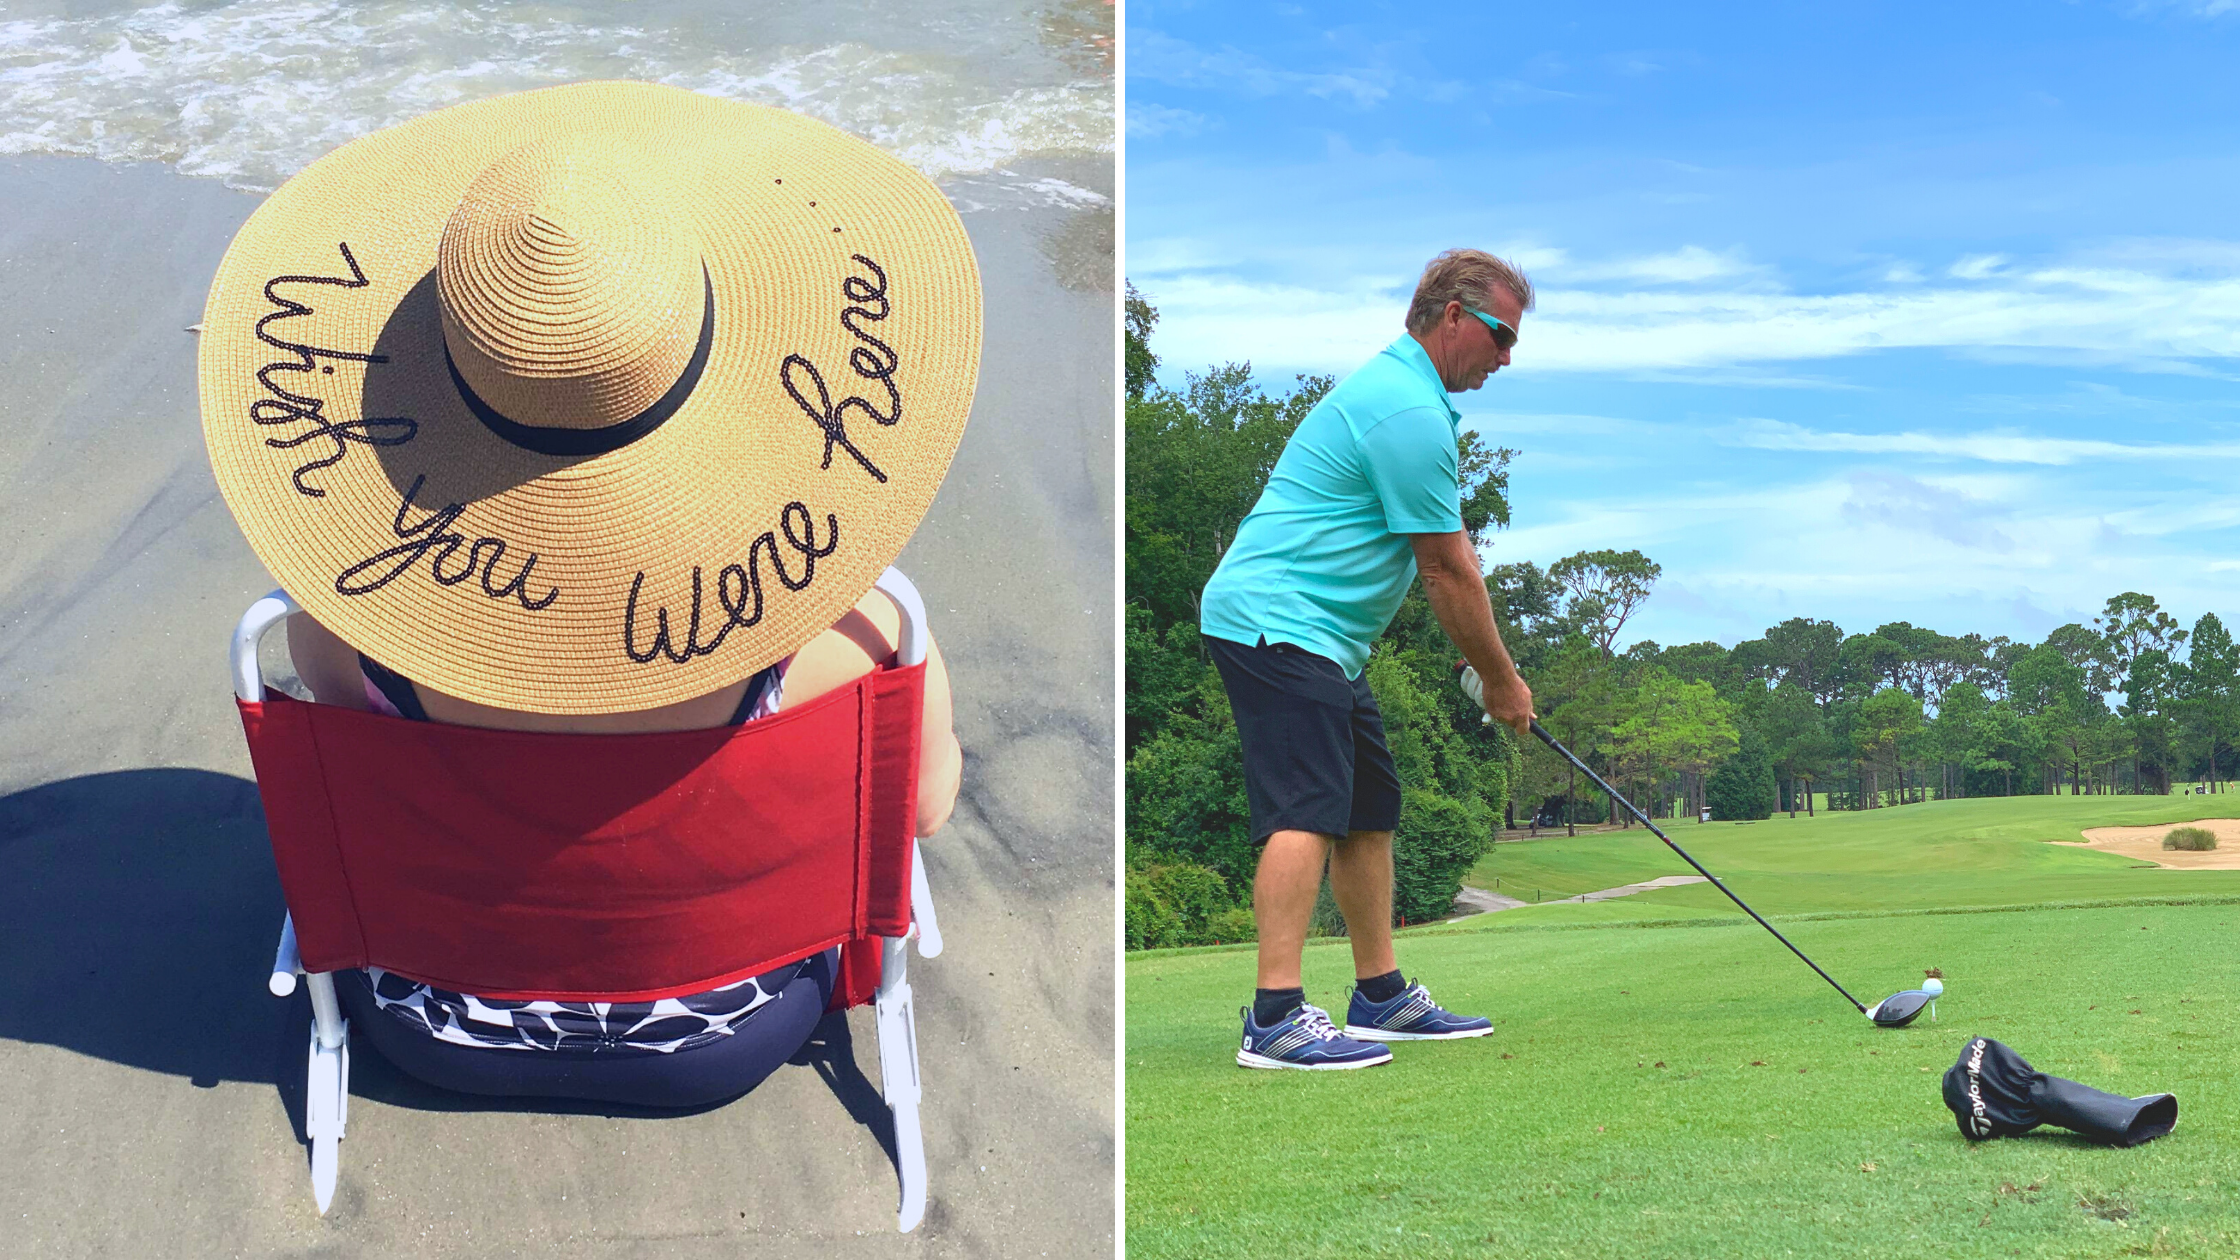 Fall activities including relaxing in a beach chair and golfing